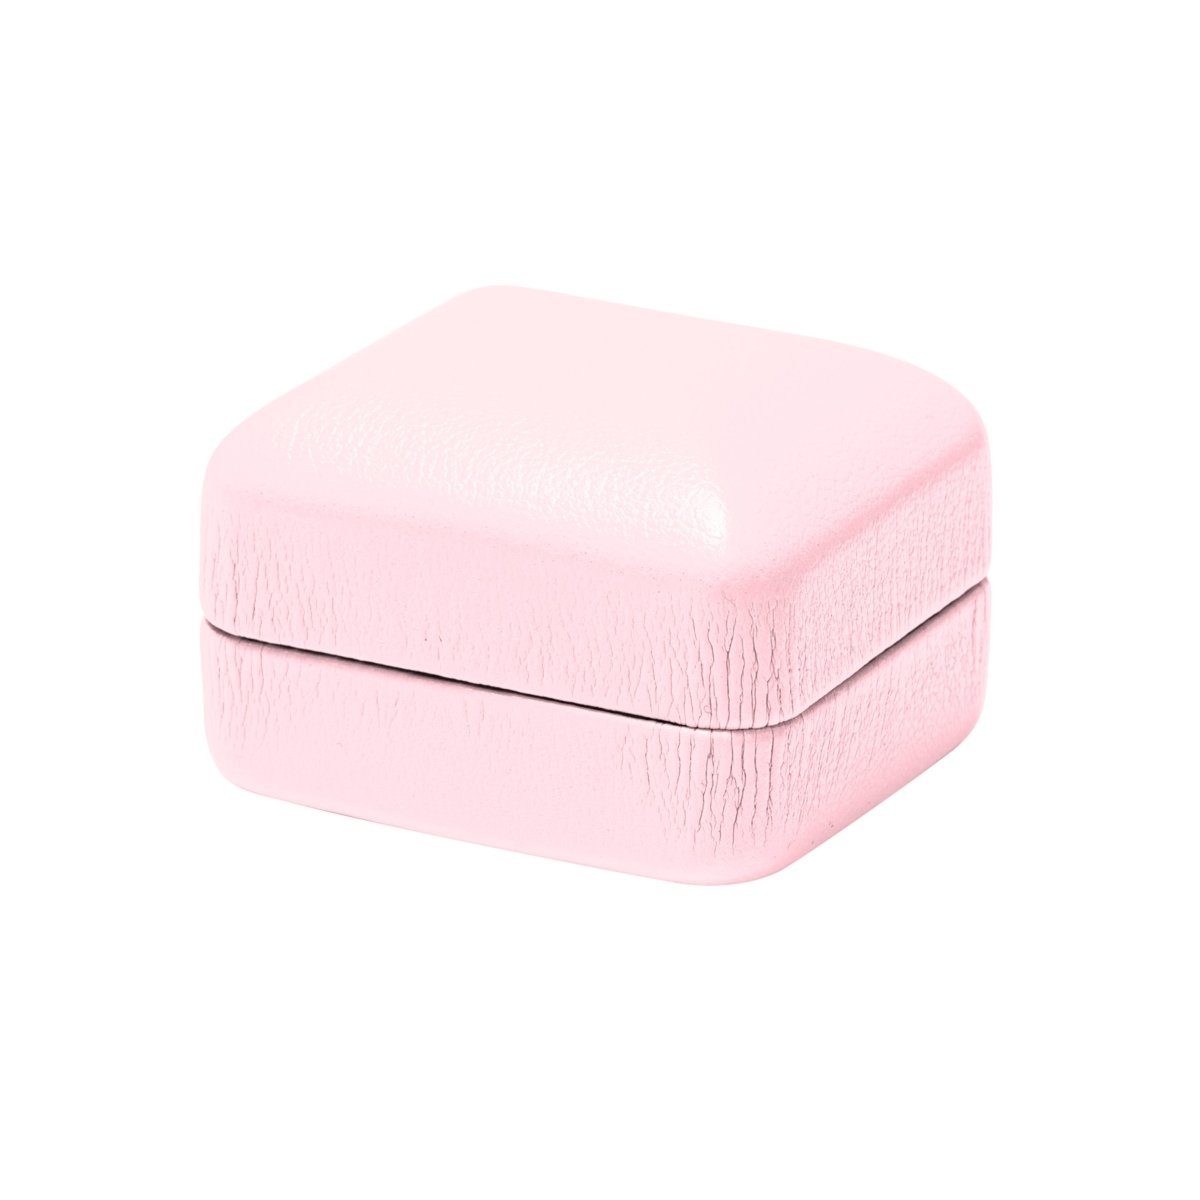 Vibrant Leatherette Ring Box - Prestige and Fancy - Pink Leatherette